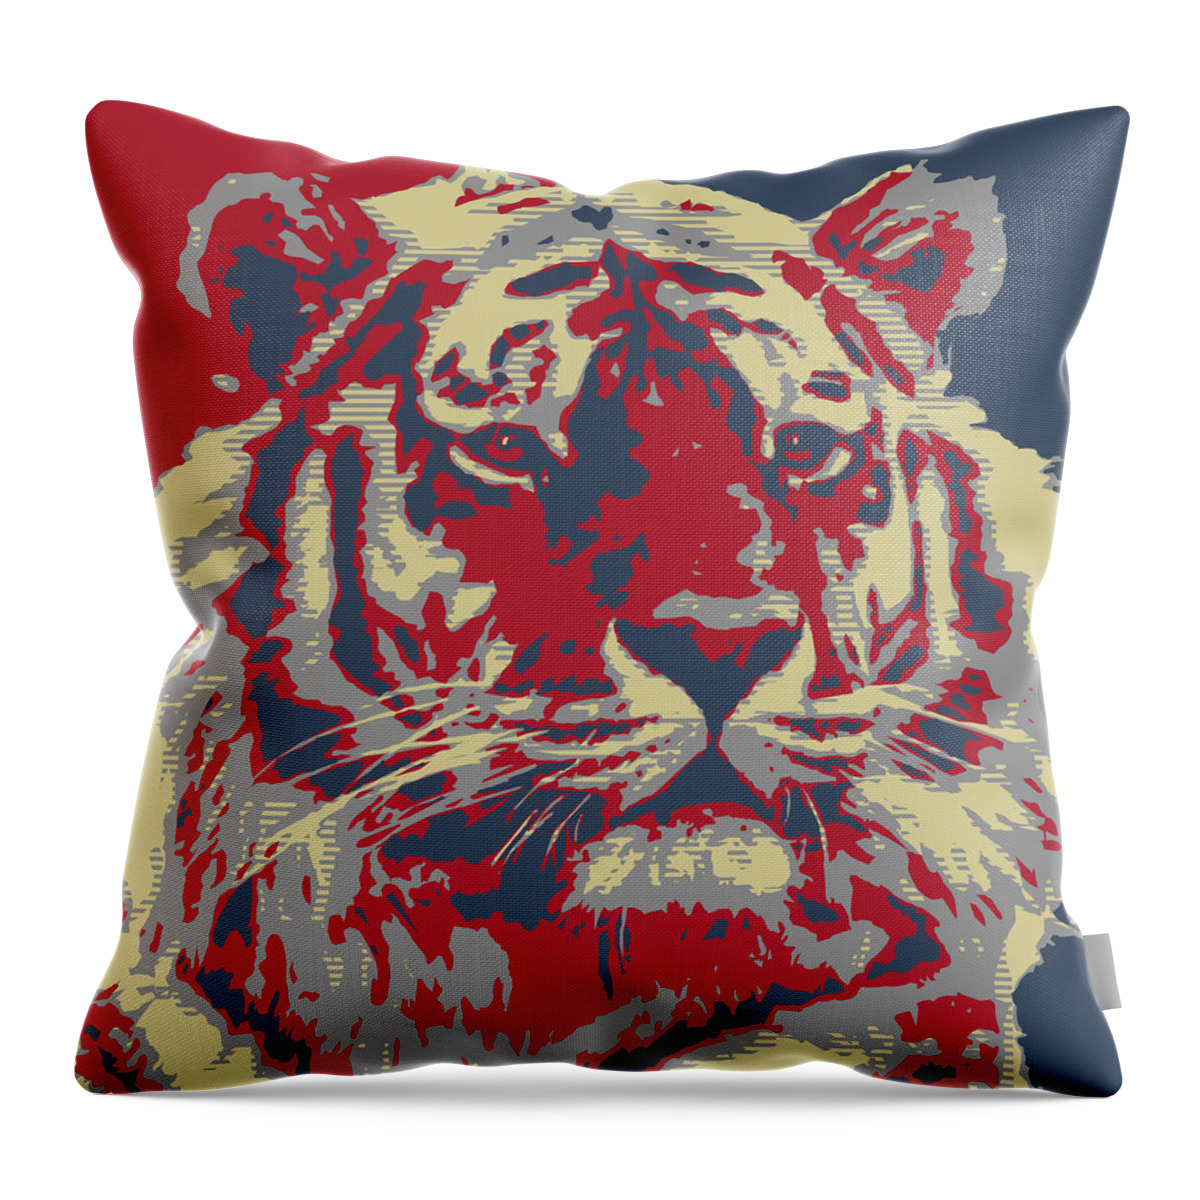 Animal Themes Throw Pillow featuring the digital art Bengal Tiger by Ben Grib Design